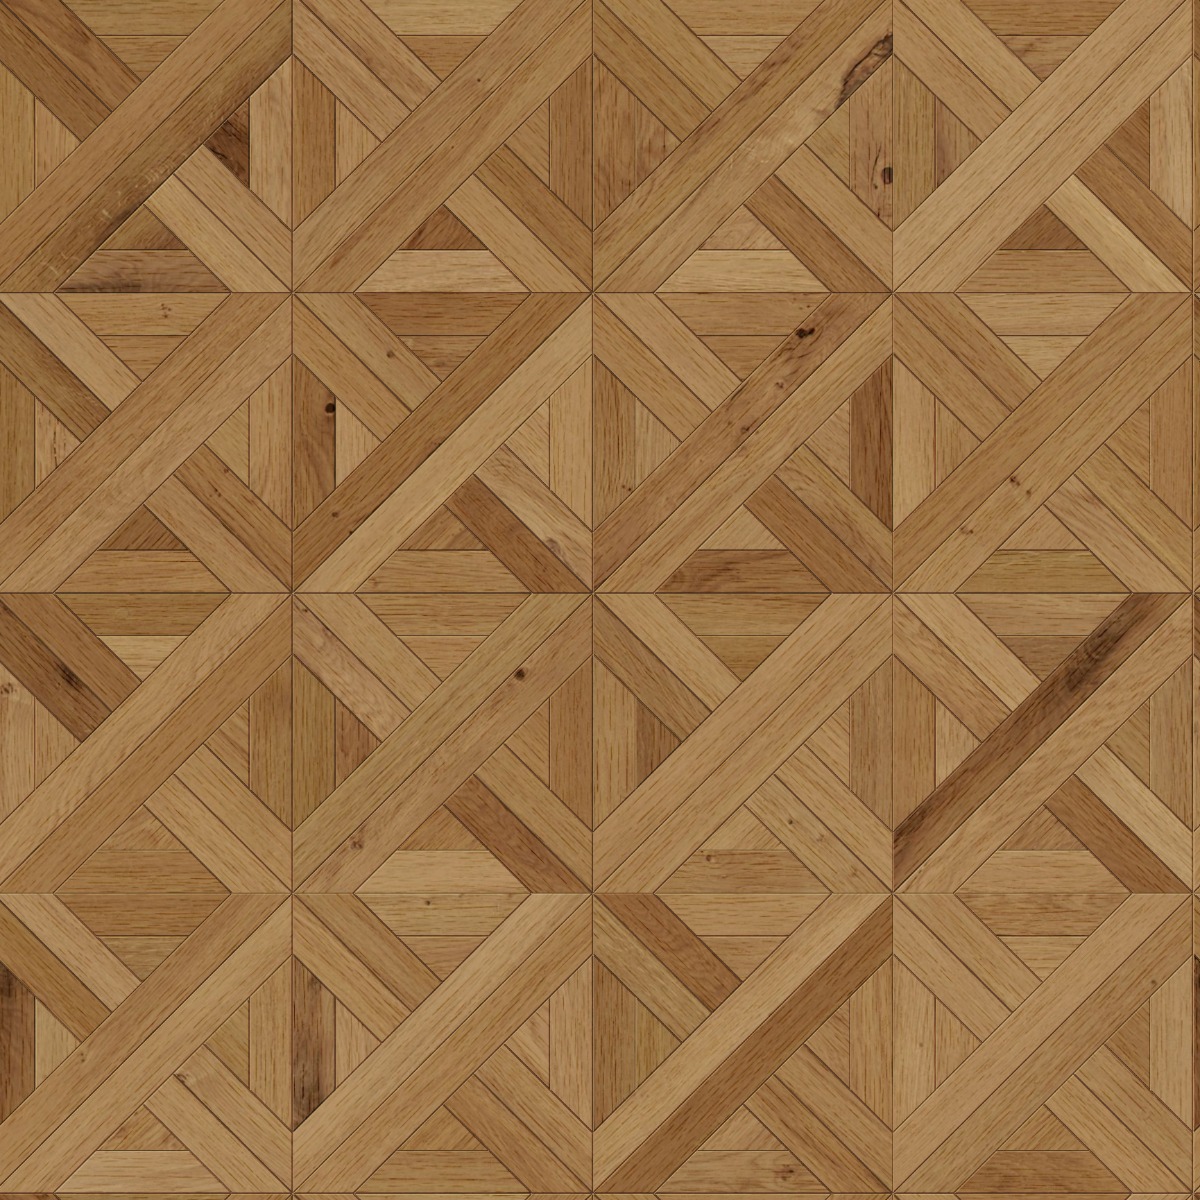 A seamless wood texture with oak boards arranged in a Versailles pattern